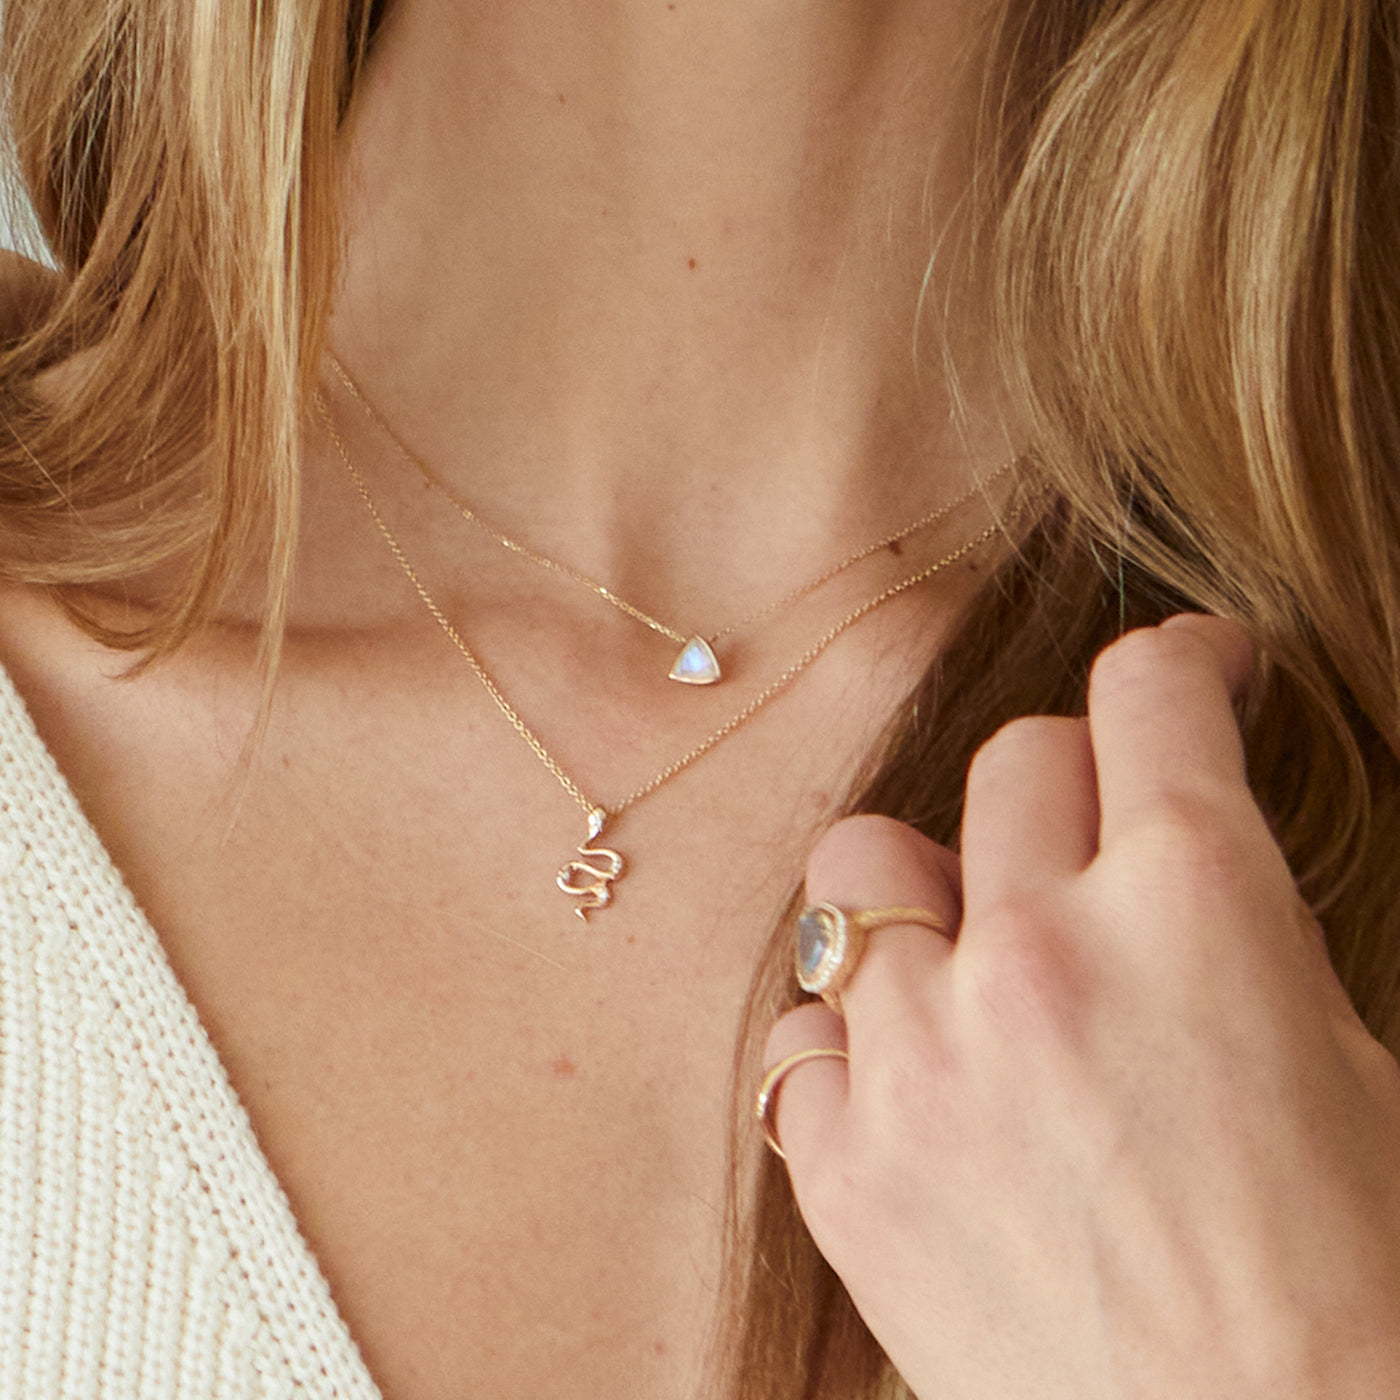 Model wearing two yellow gold necklaces. One is a trillion cut moonstone and the other is a snake pendant with diamonds.